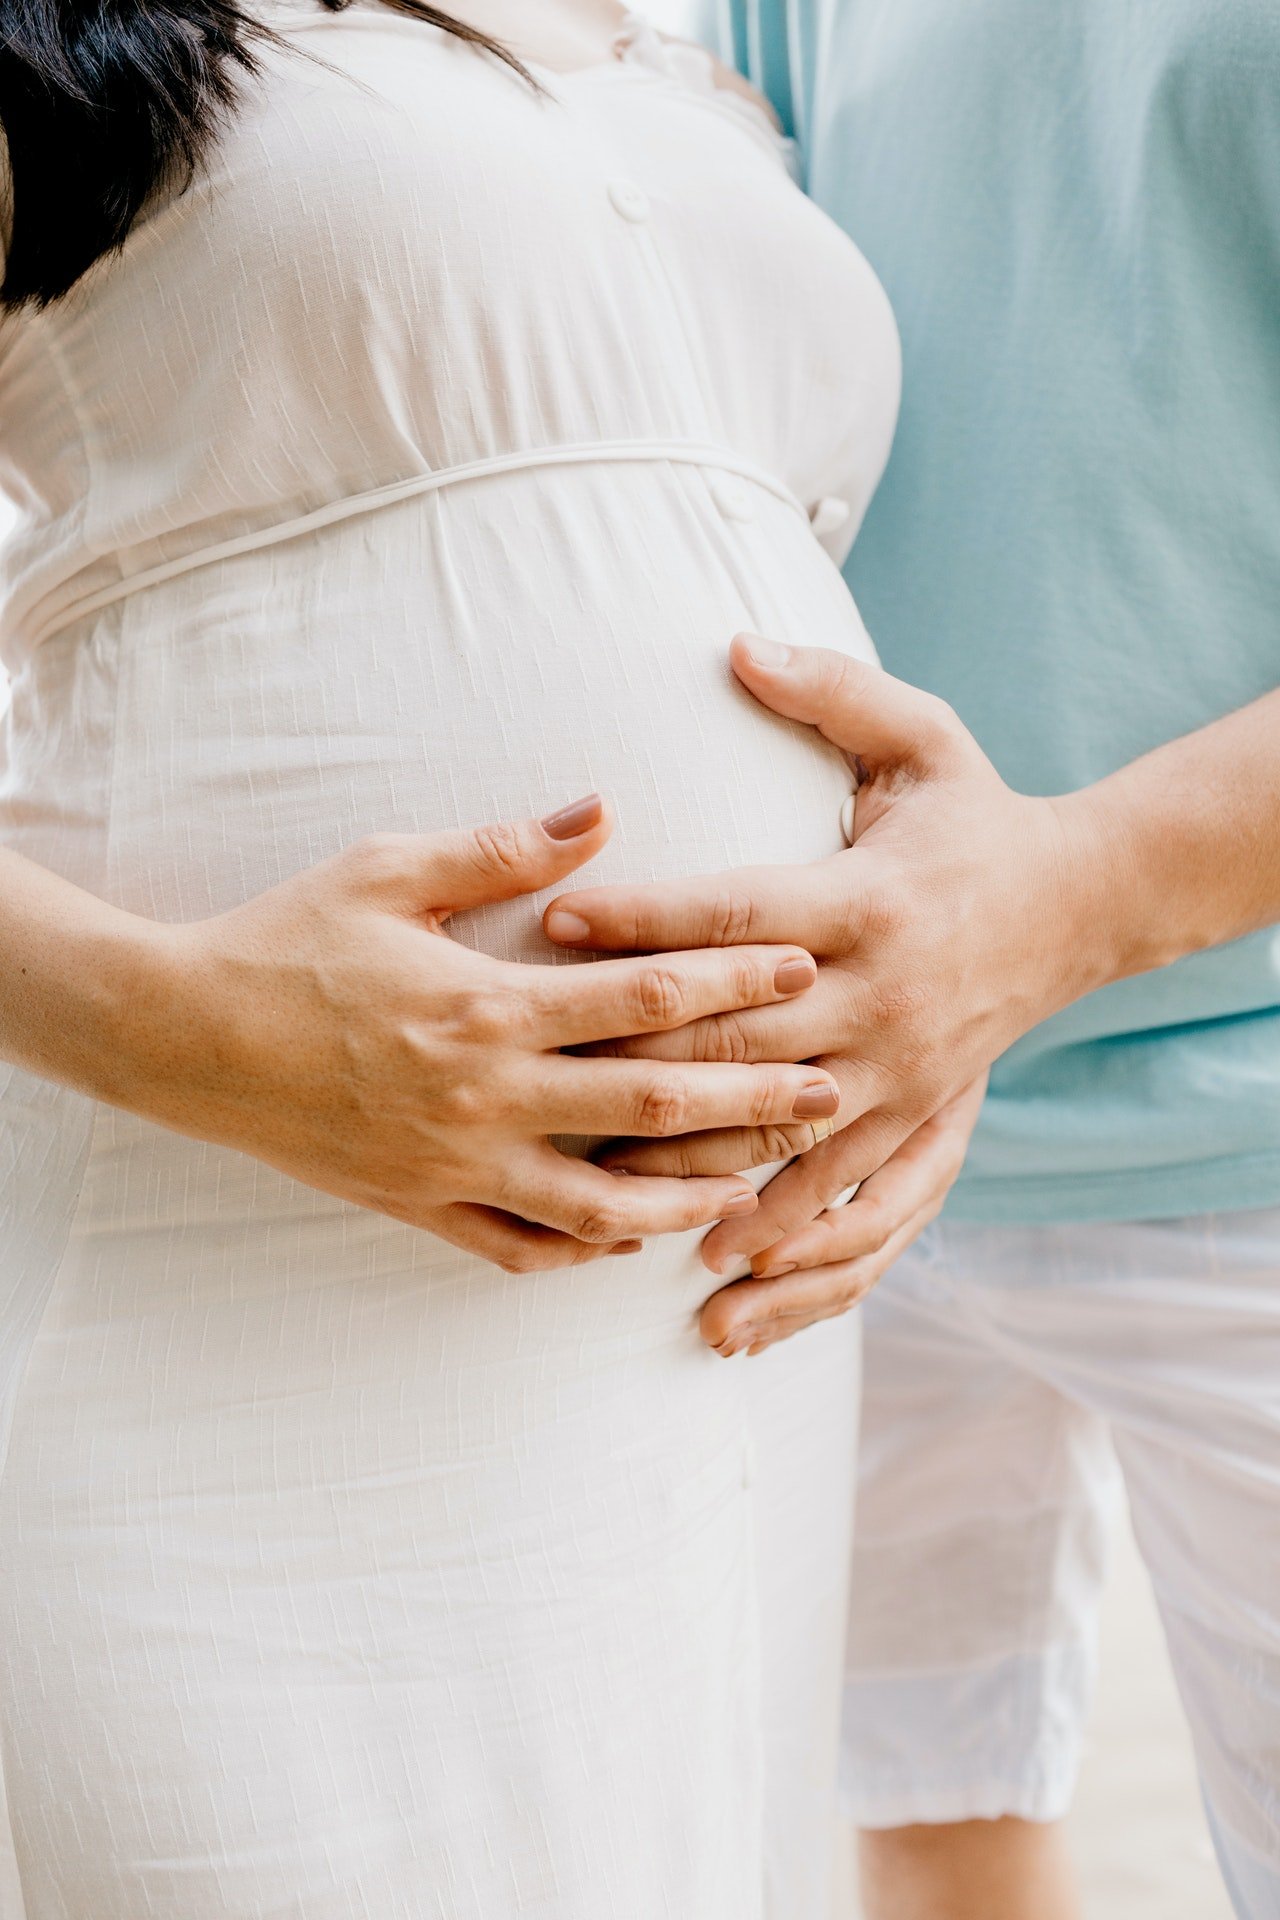 Man and pregnant woman's hands cradling her belly. | Source: Pexels